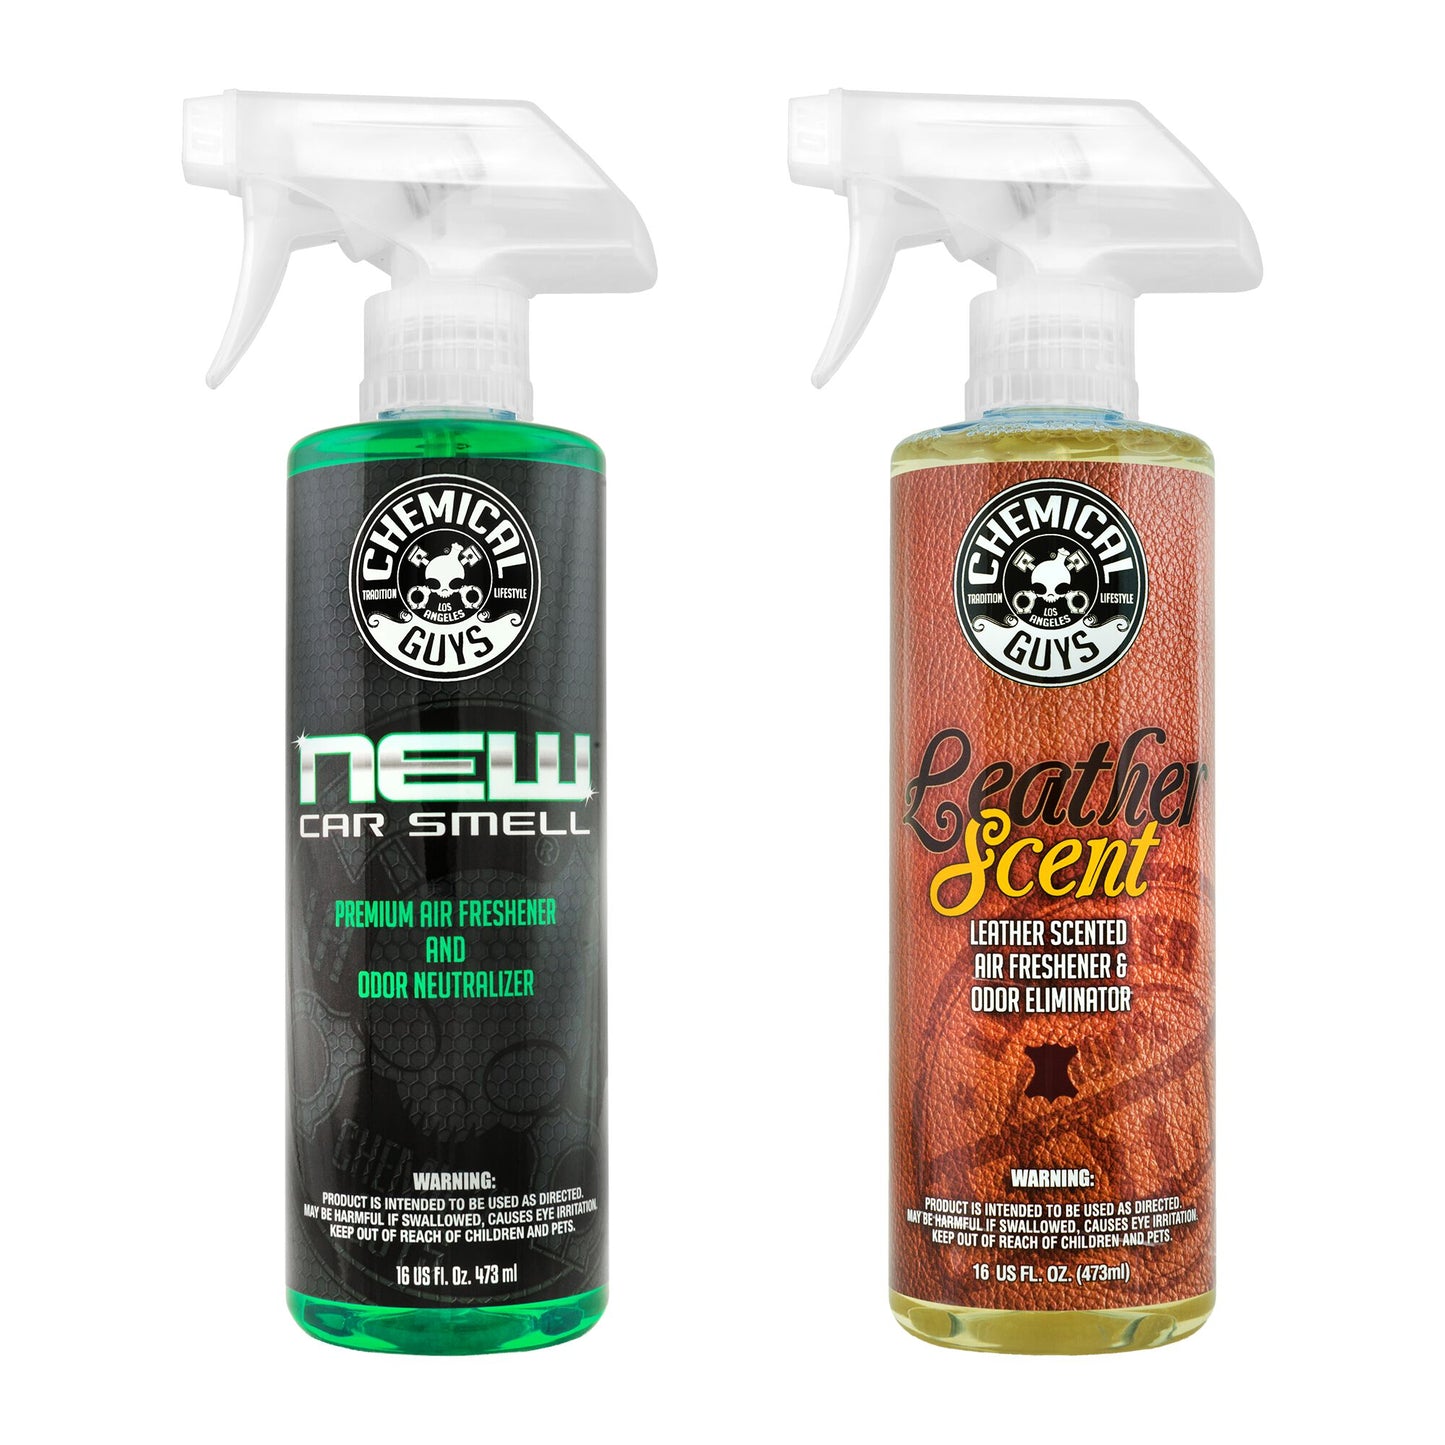 New Car Scent & Leather Scent Kit